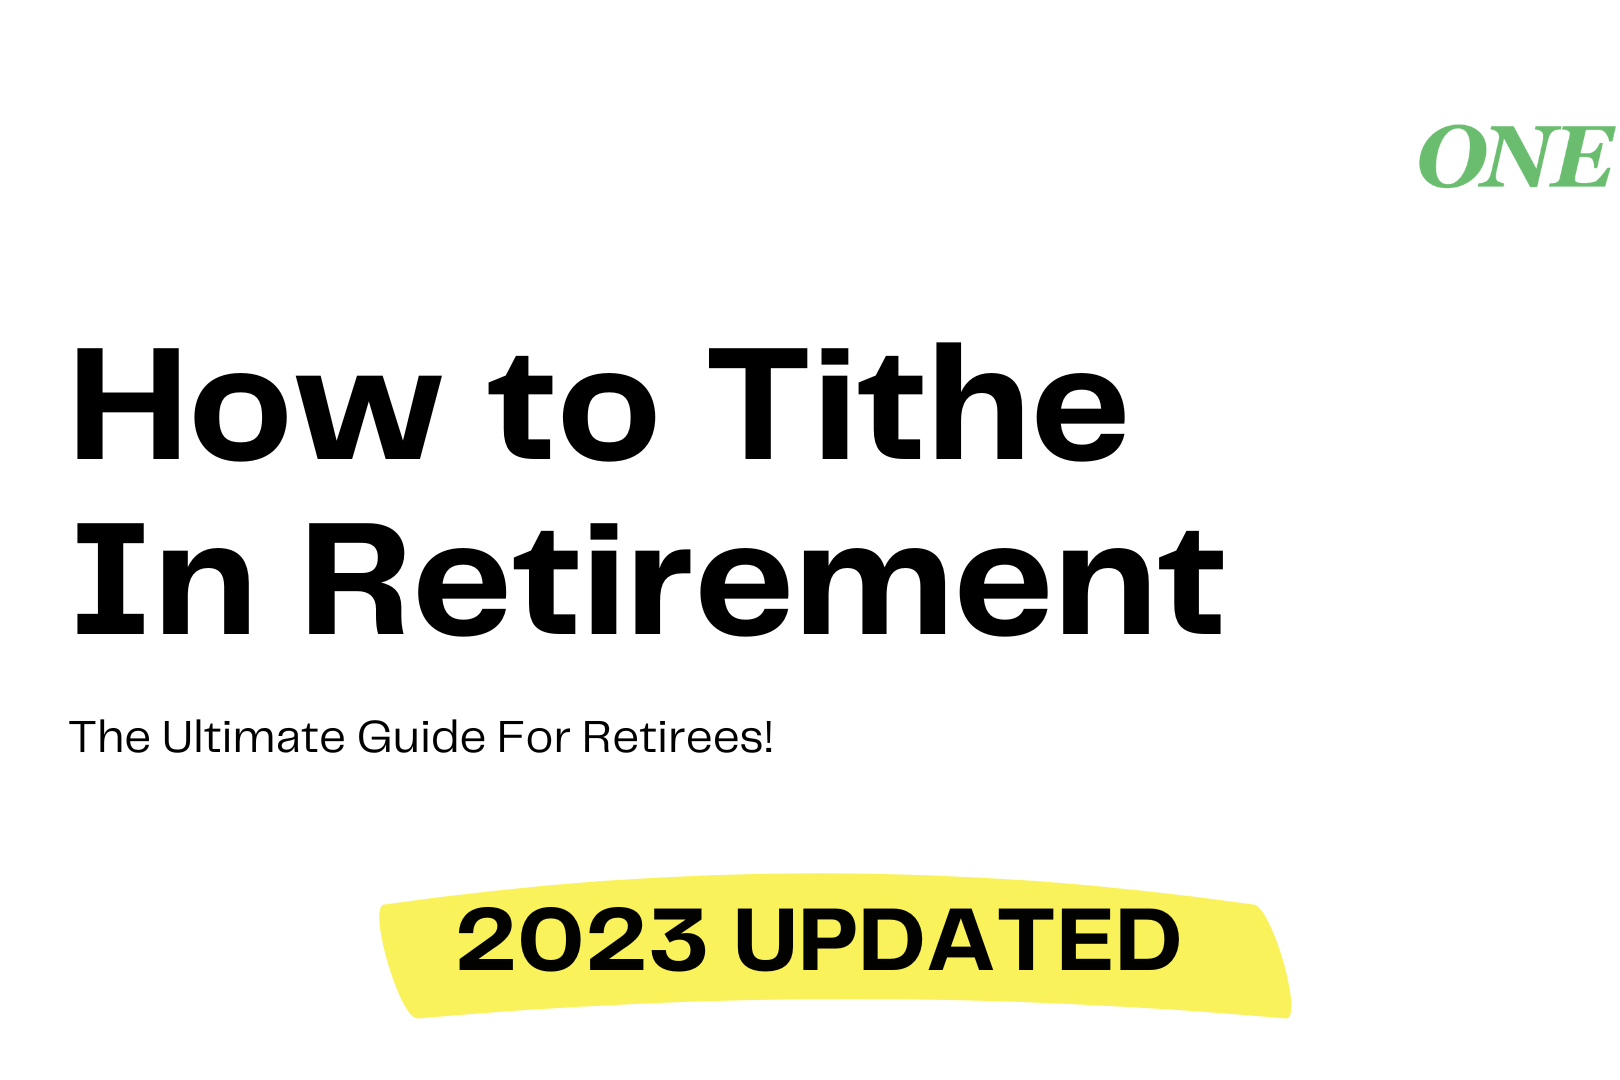 How to tithe in retirement 2023 edition